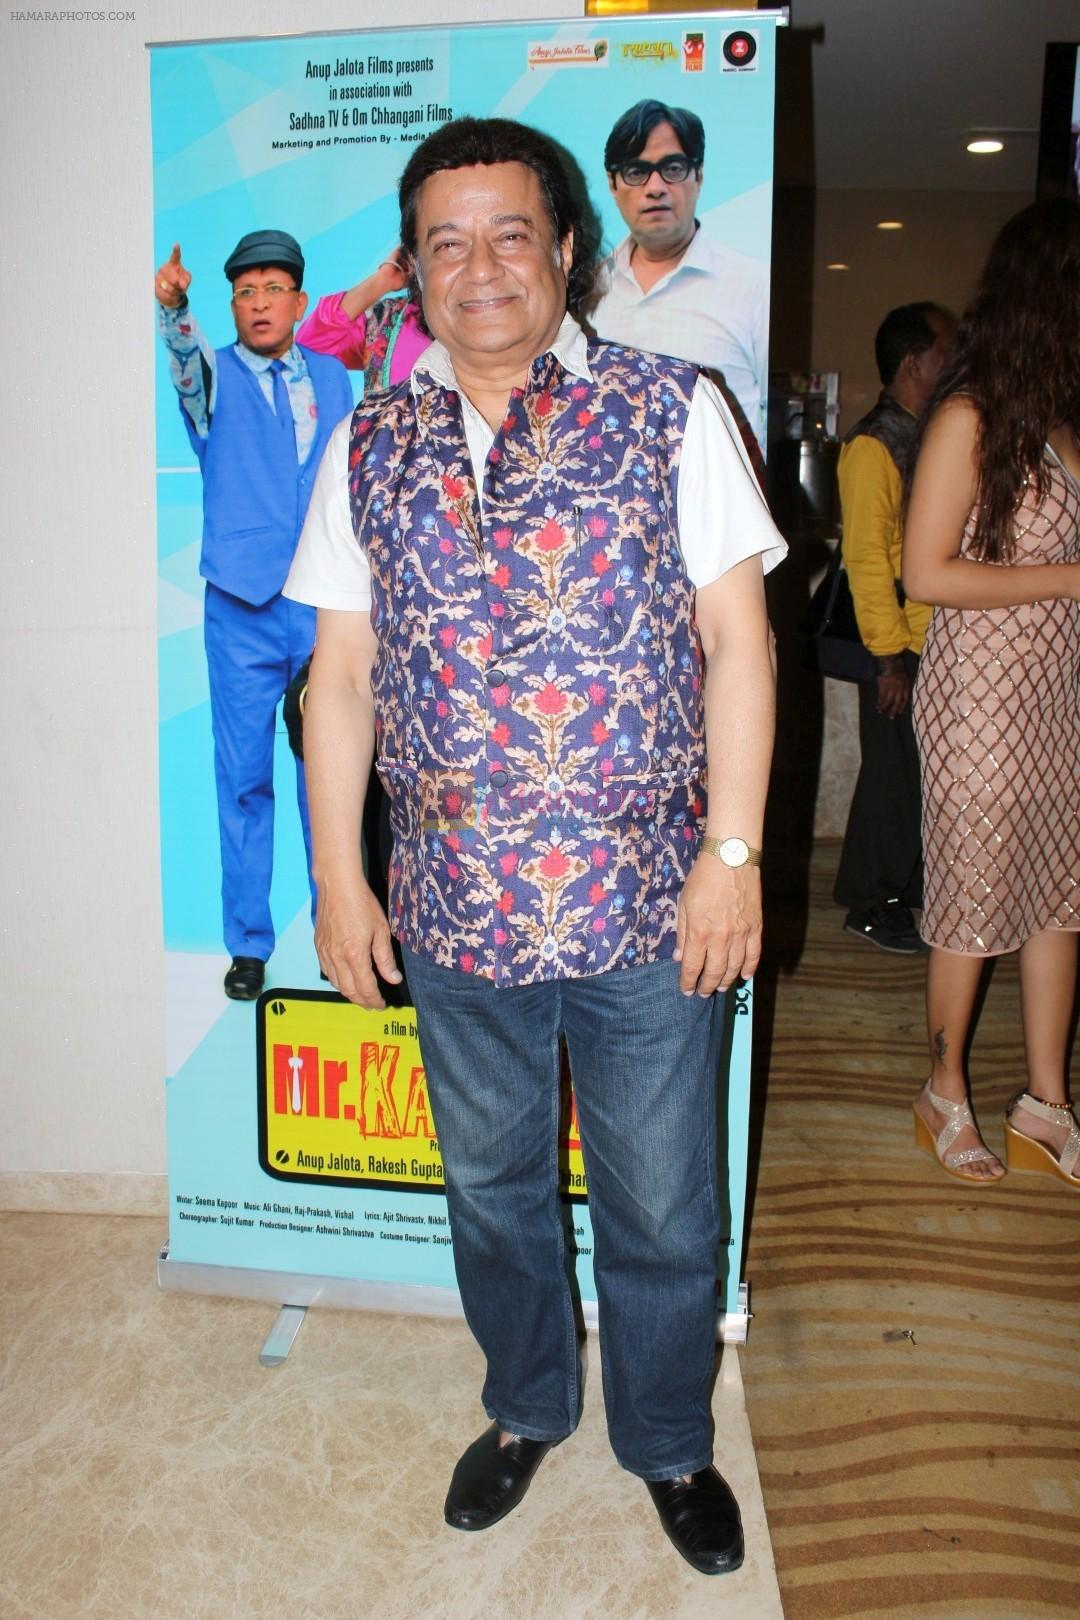 Anup Jalota At Teaser Release Of Hindi Comedy Film Mr. Kabaadi on 12th